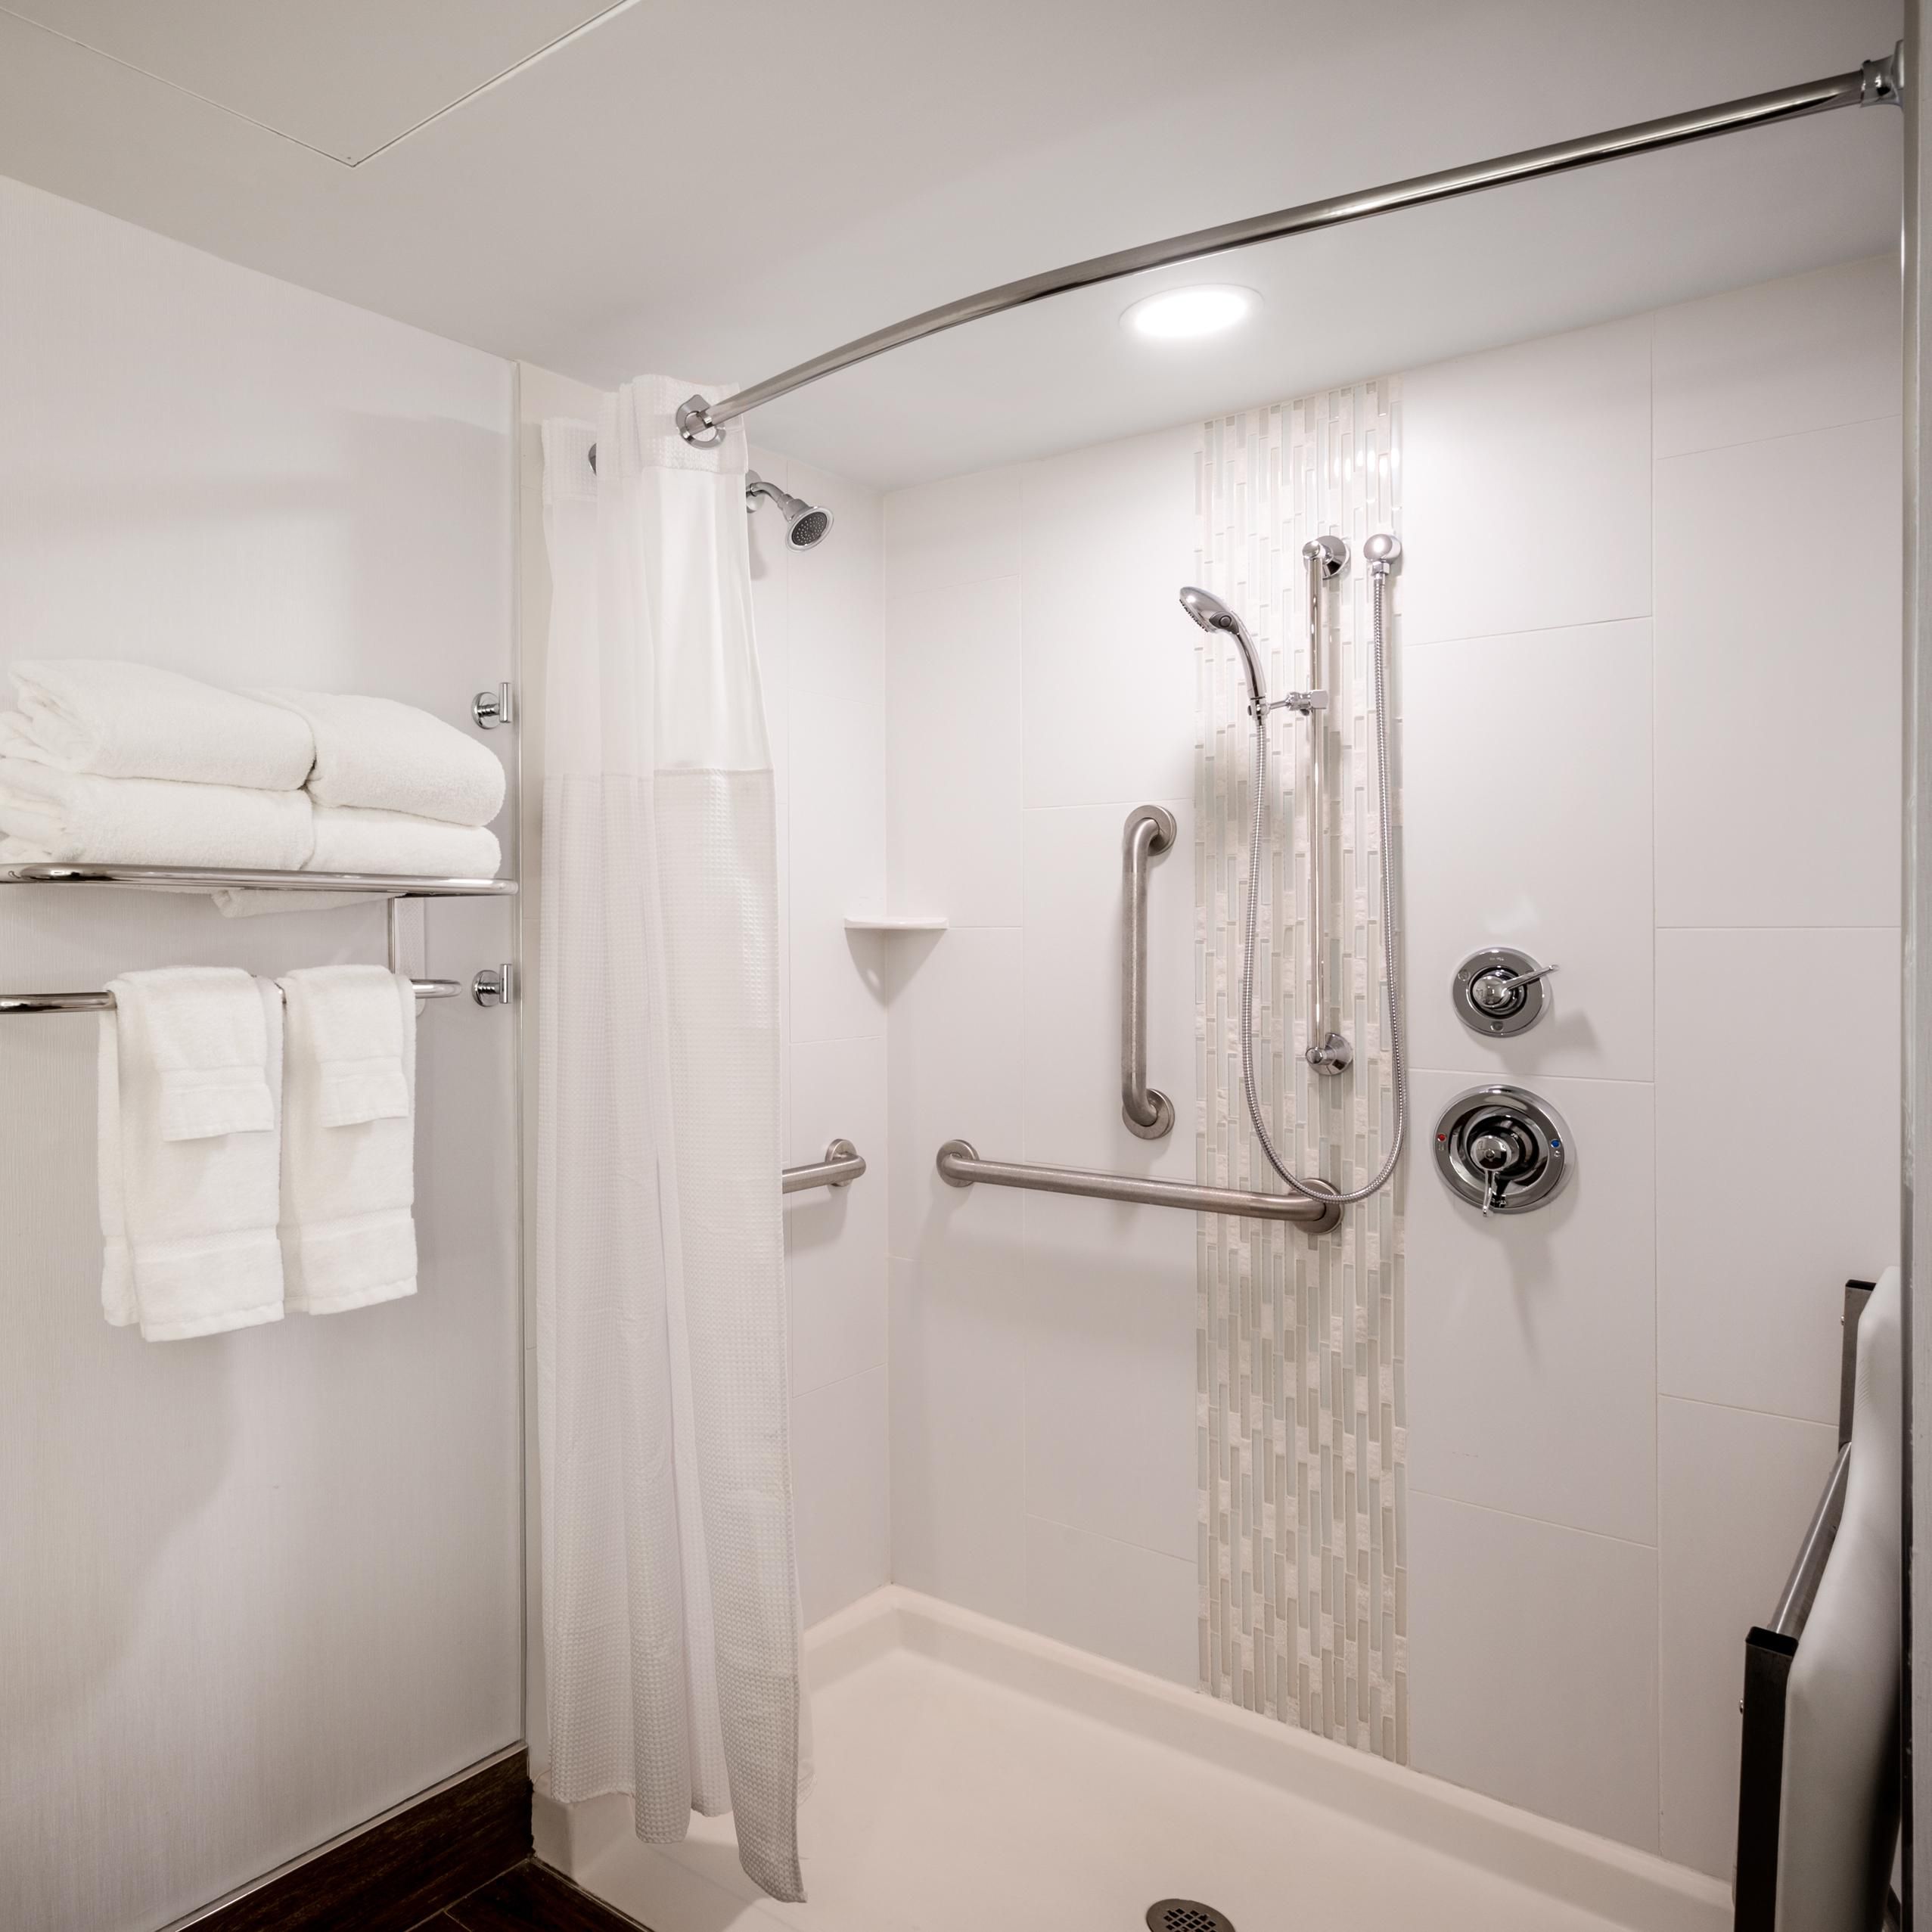 ADA/handicap accessible guest bathroom with roll-in shower